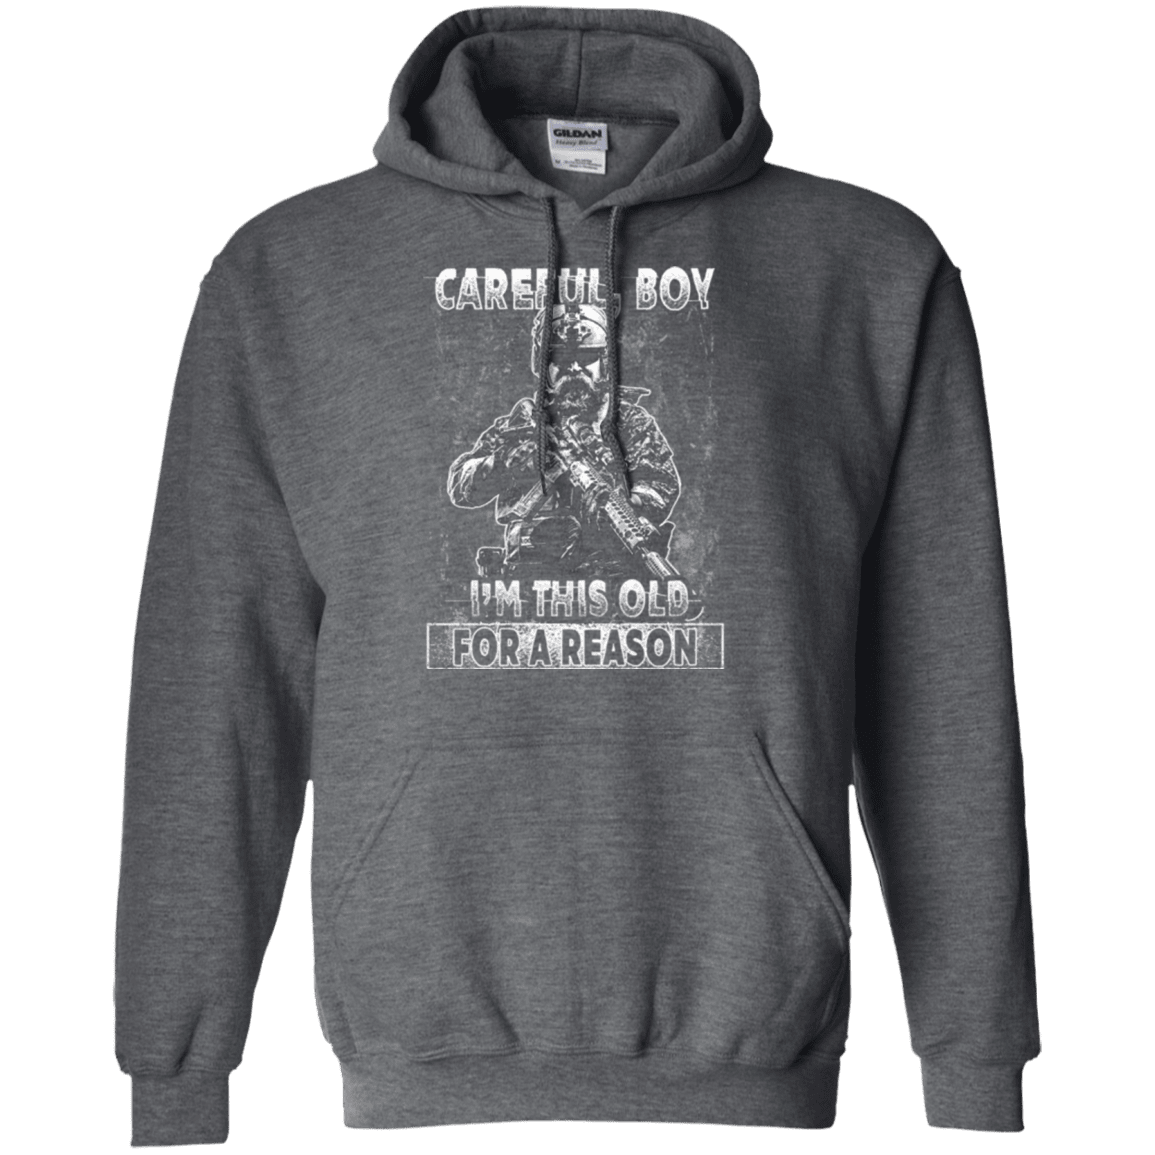 Military T-Shirt "Careful Boy I Am This Old For A Reason"-TShirt-General-Veterans Nation